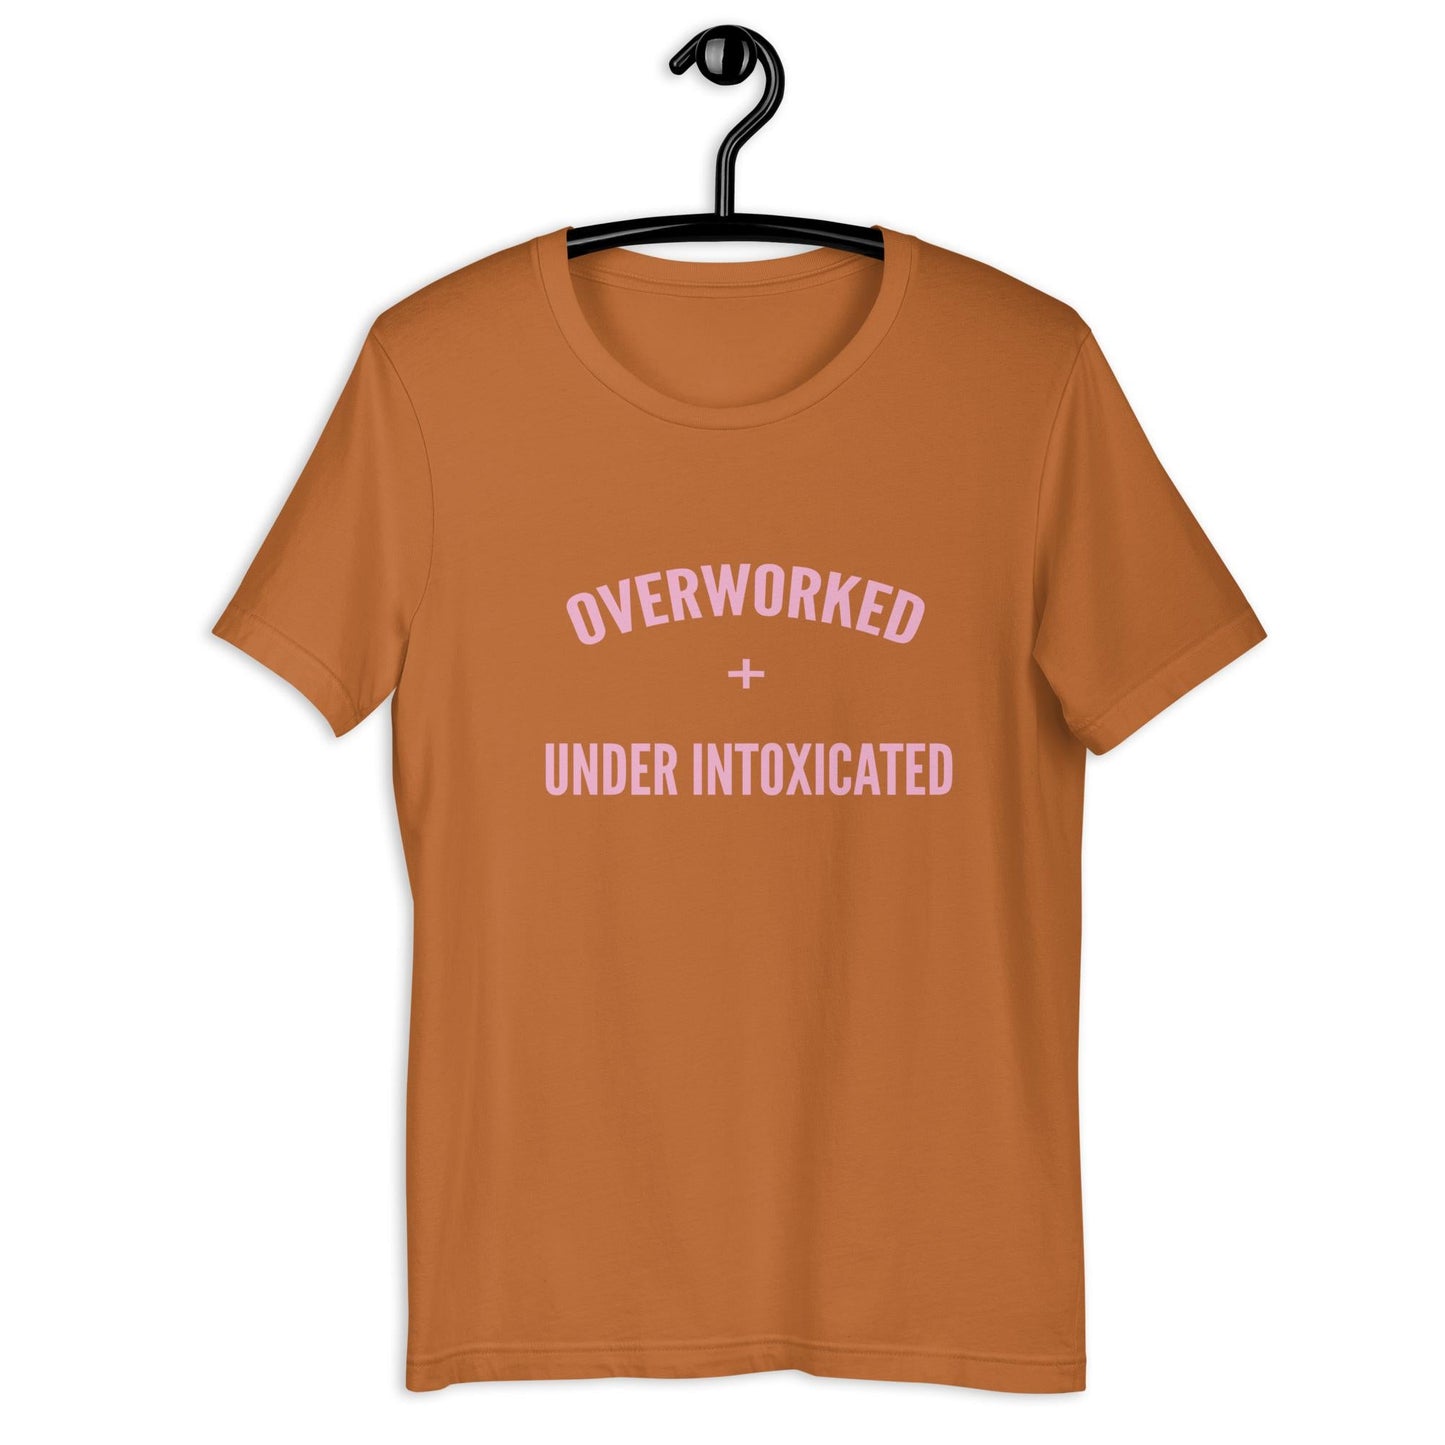 Load image into Gallery viewer, Overworked + Underintoxicated Eco Friendly Unisex Shirt-Tees-Crimson and Clover Studio
